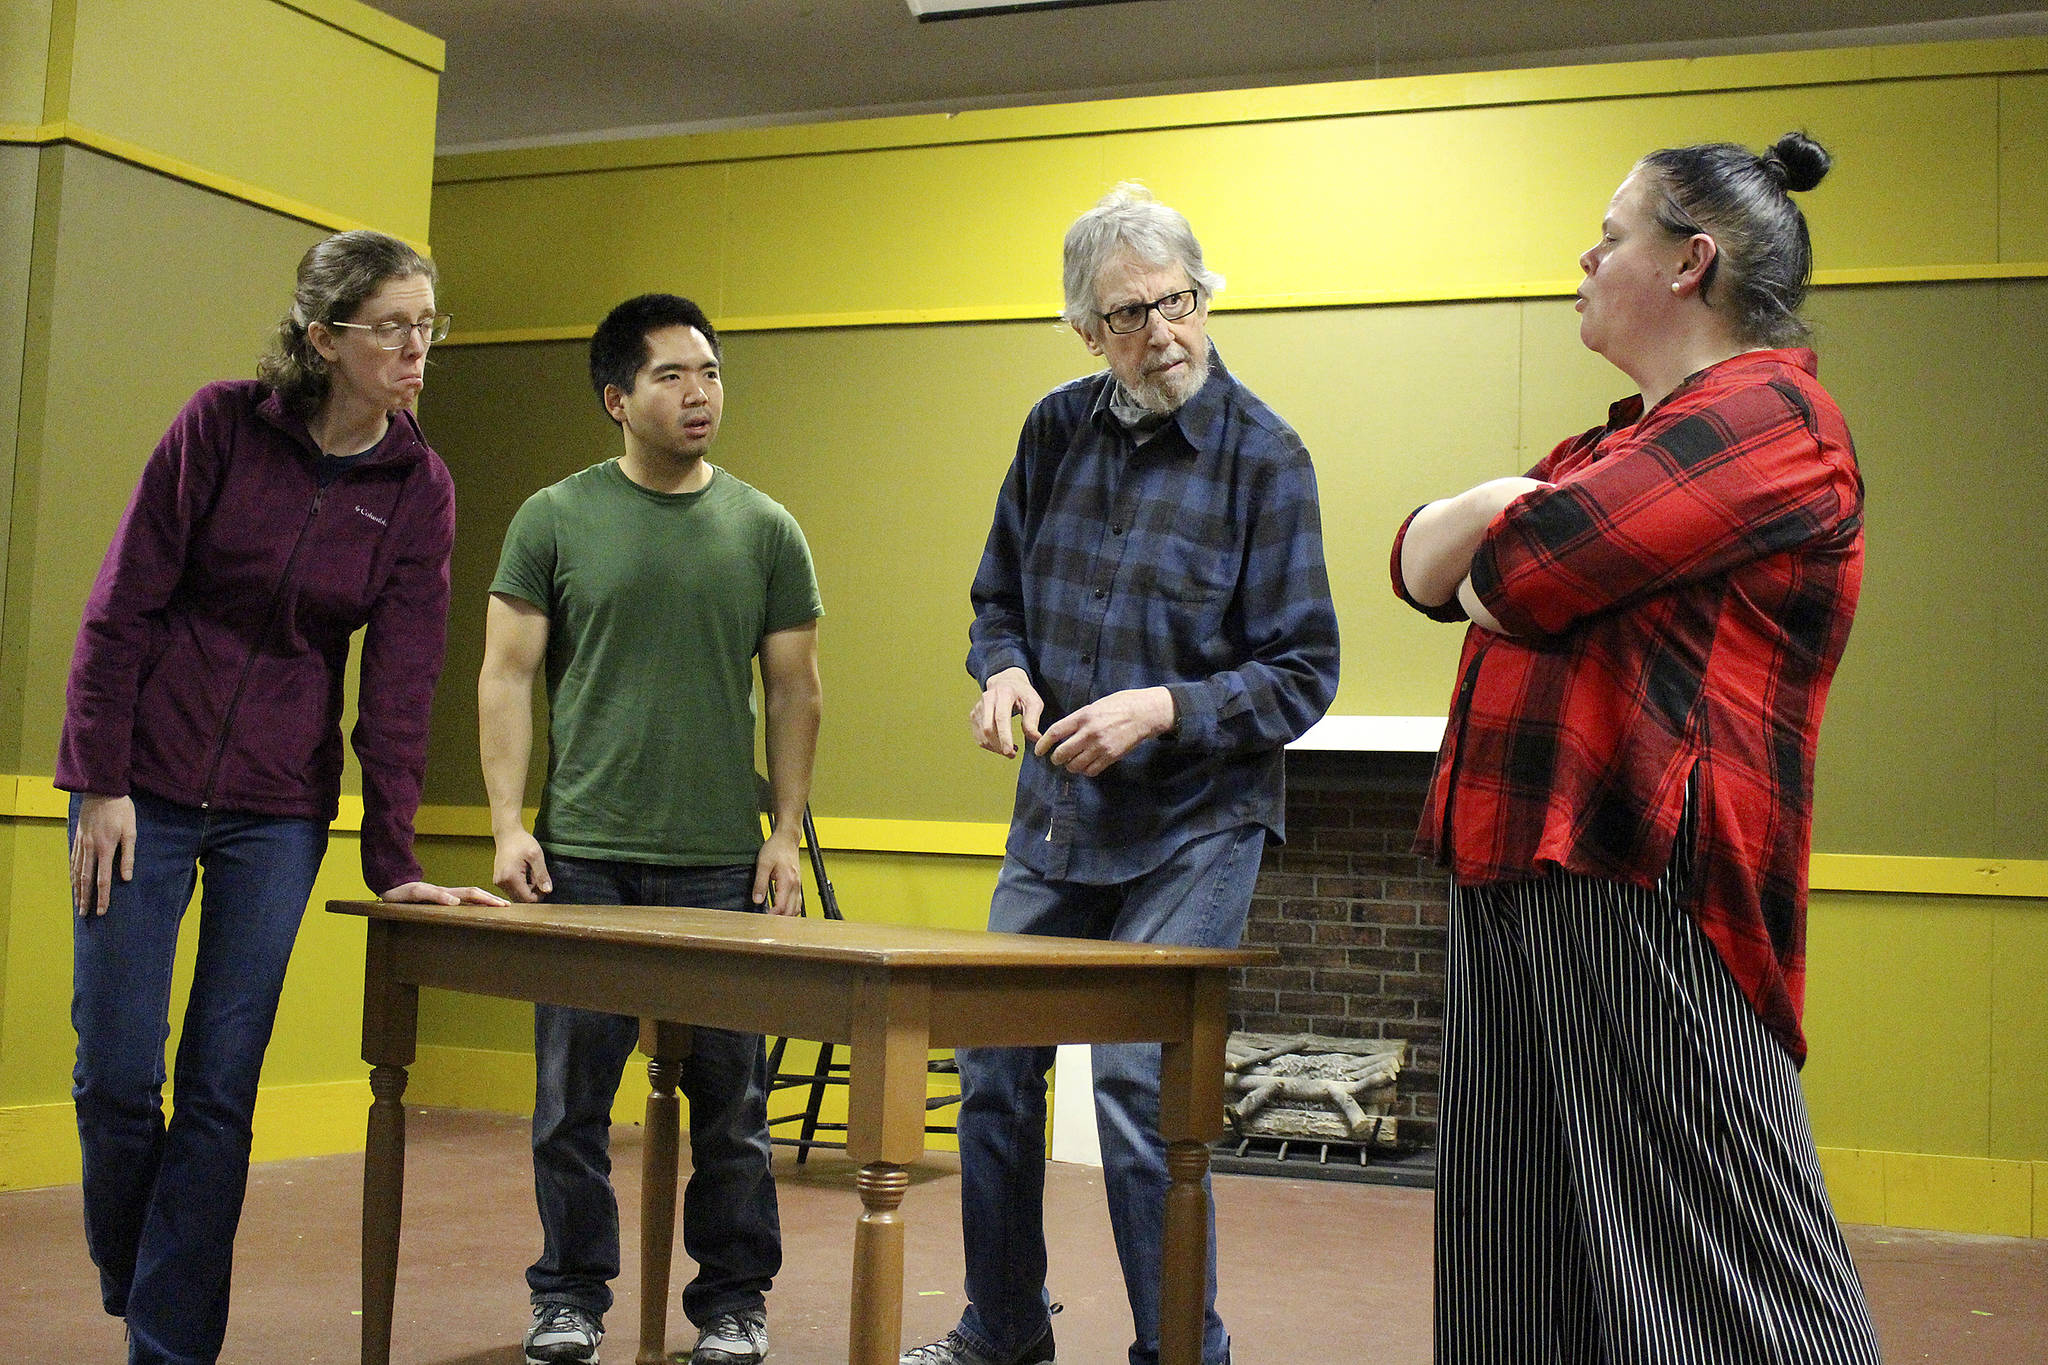 File photoIn this November 2019 photo, Lucy Adams, Tim Takechi, Craig Ewing and Renee Lystad rehearse for VCS’s production of “A Christmas Carol.”